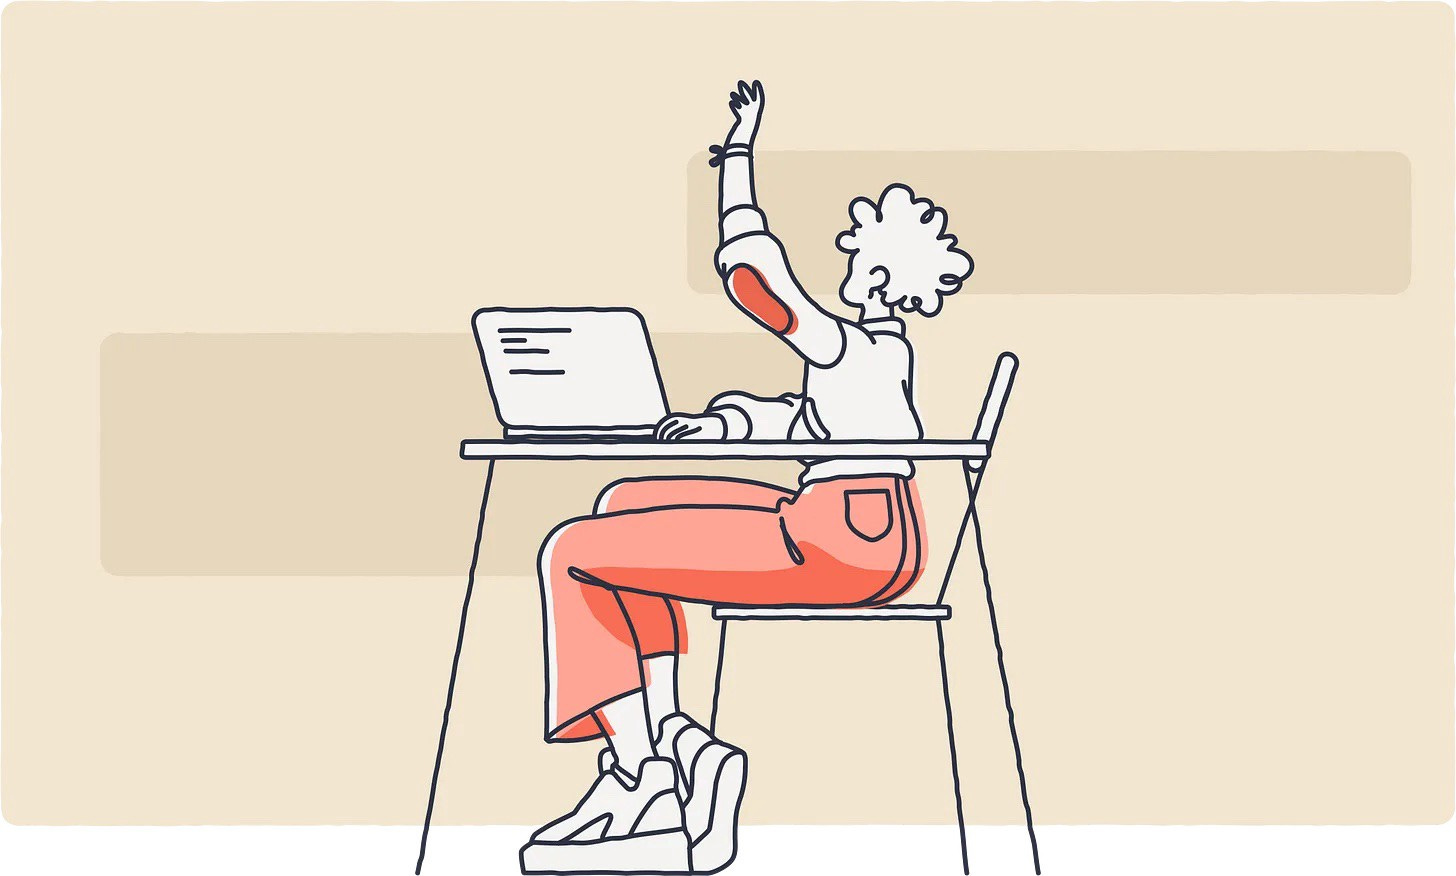 An illustration of a student holding up their hand while sat at a desk